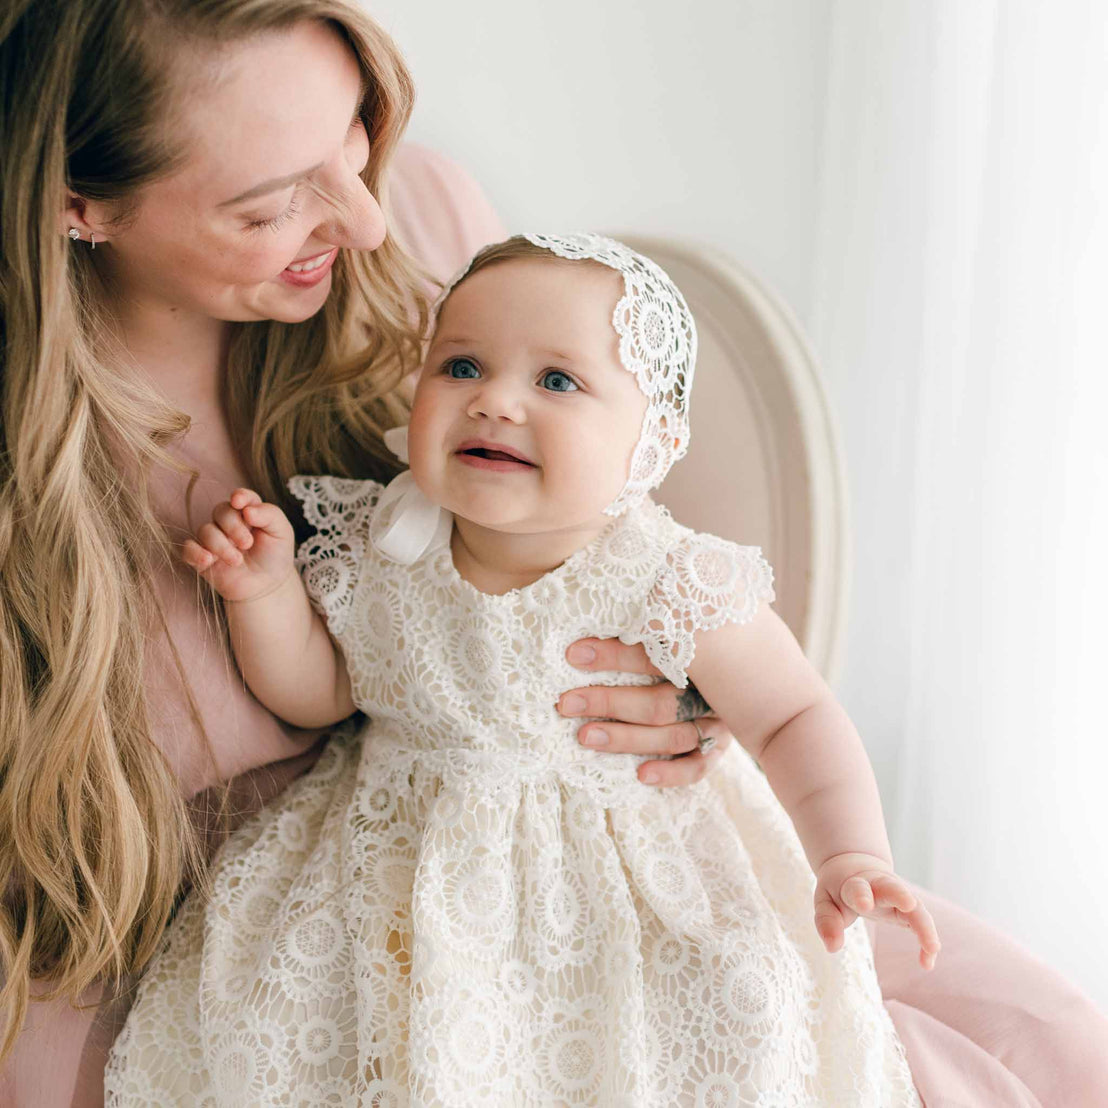 A woman with long blonde hair holds a baby dressed in a beautiful Poppy Christening Gown & Bonnet. Both are smiling warmly. They are indoors with a light background.